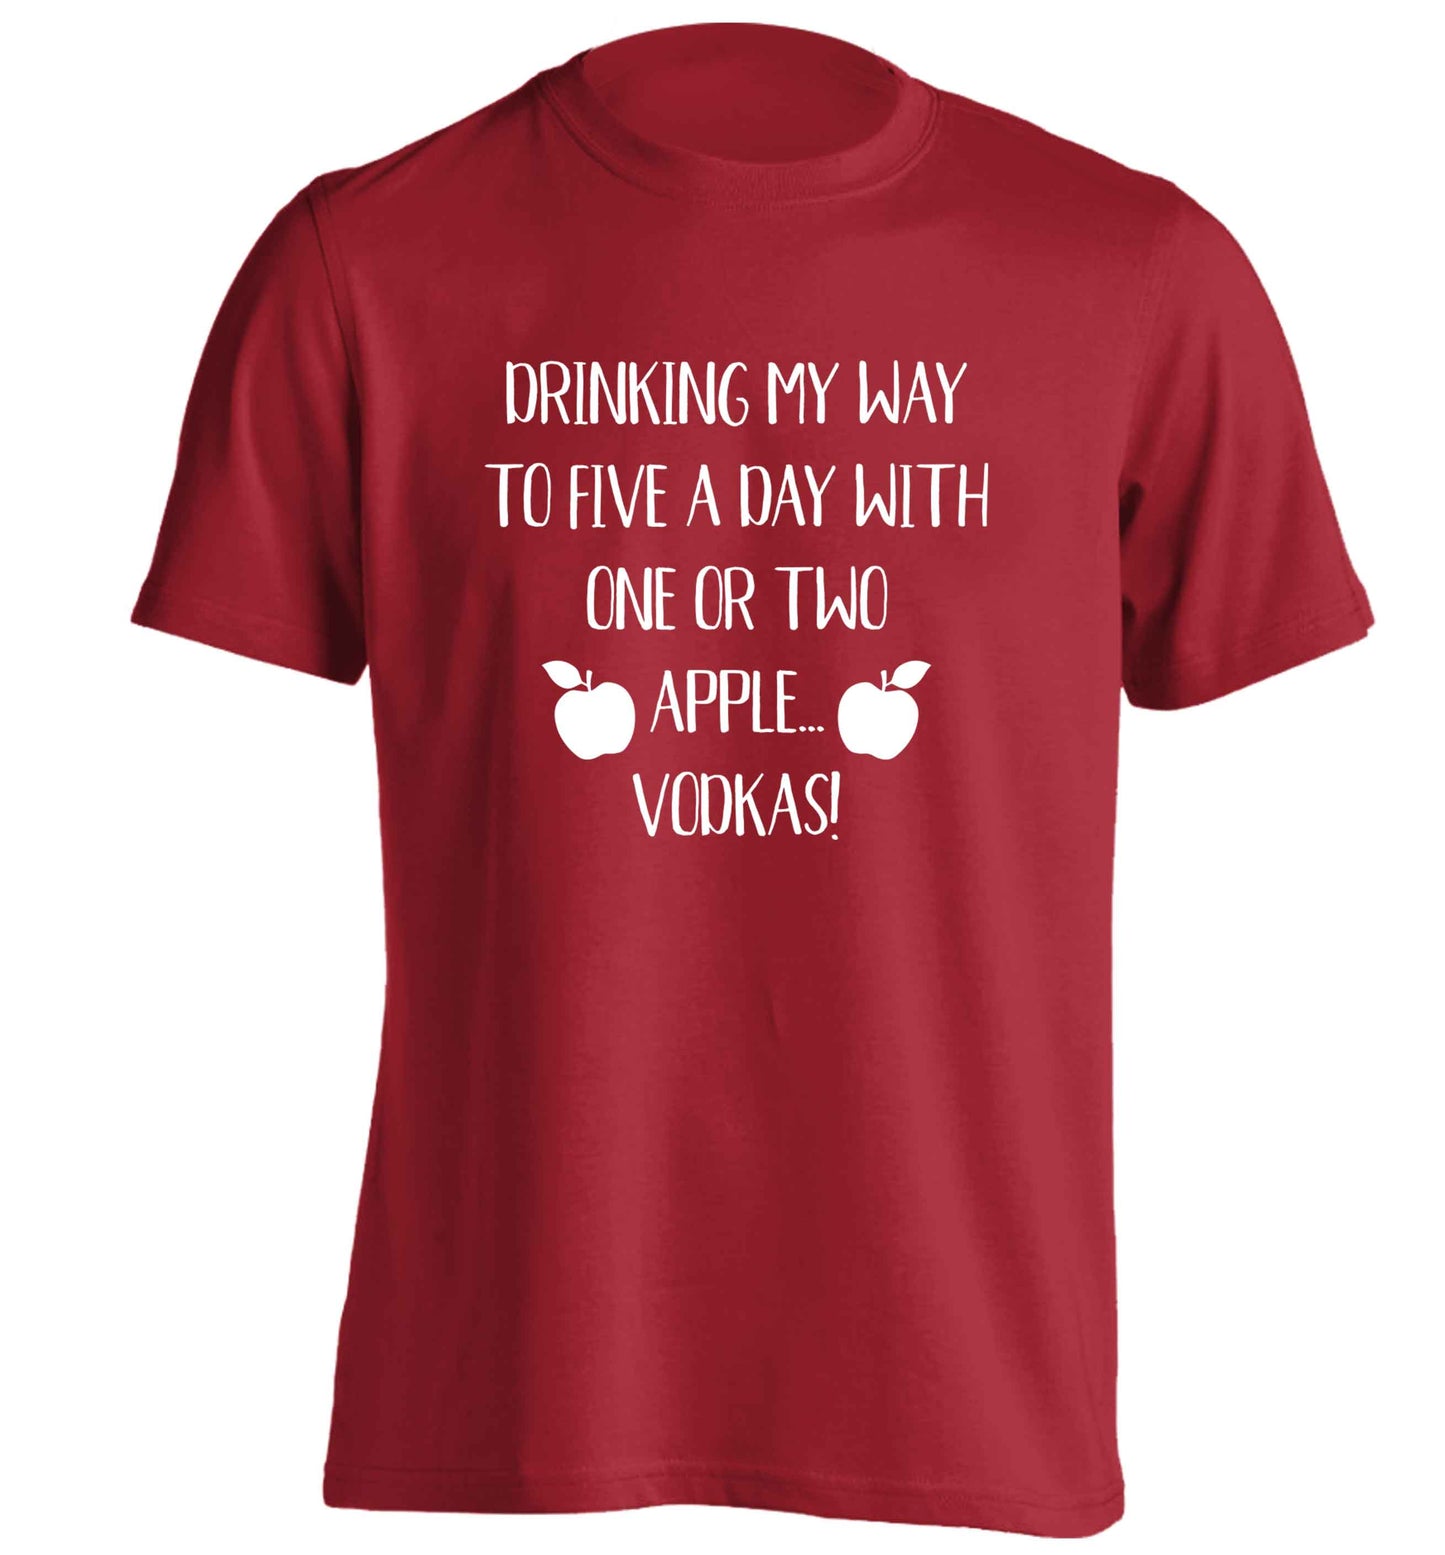 Drinking my way to five a day with one or two apple vodkas adults unisex red Tshirt 2XL